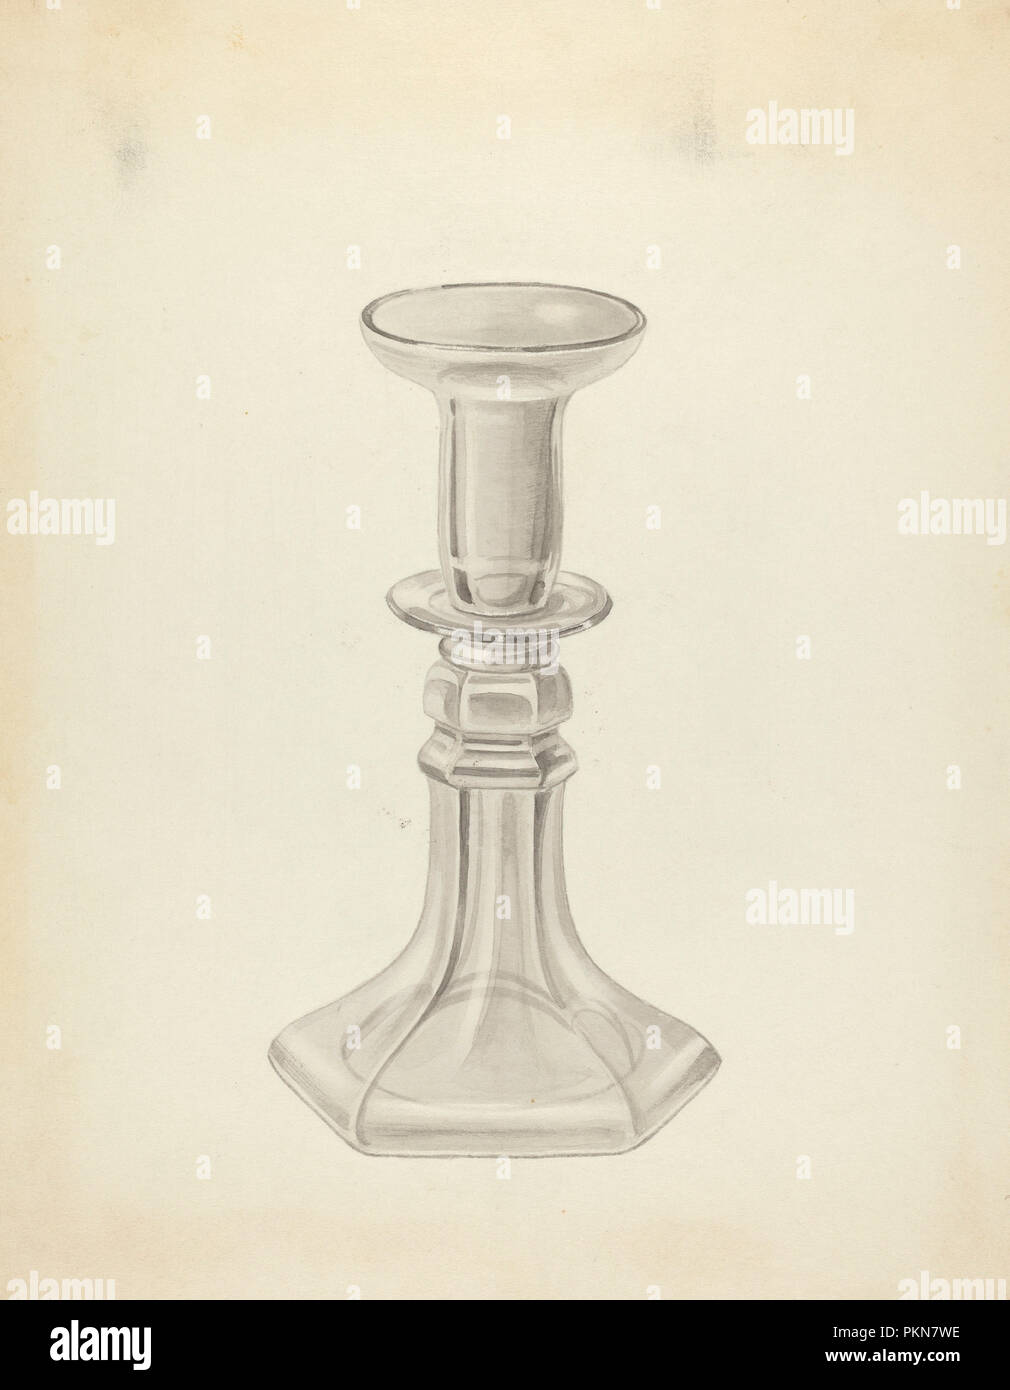 Candlestick. Dated: c. 1937. Dimensions: overall: 29.2 x 22.8 cm (11 1/2 x 9 in.). Medium: watercolor and graphite on paperboard. Museum: National Gallery of Art, Washington DC. Author: John Fisk. Stock Photo